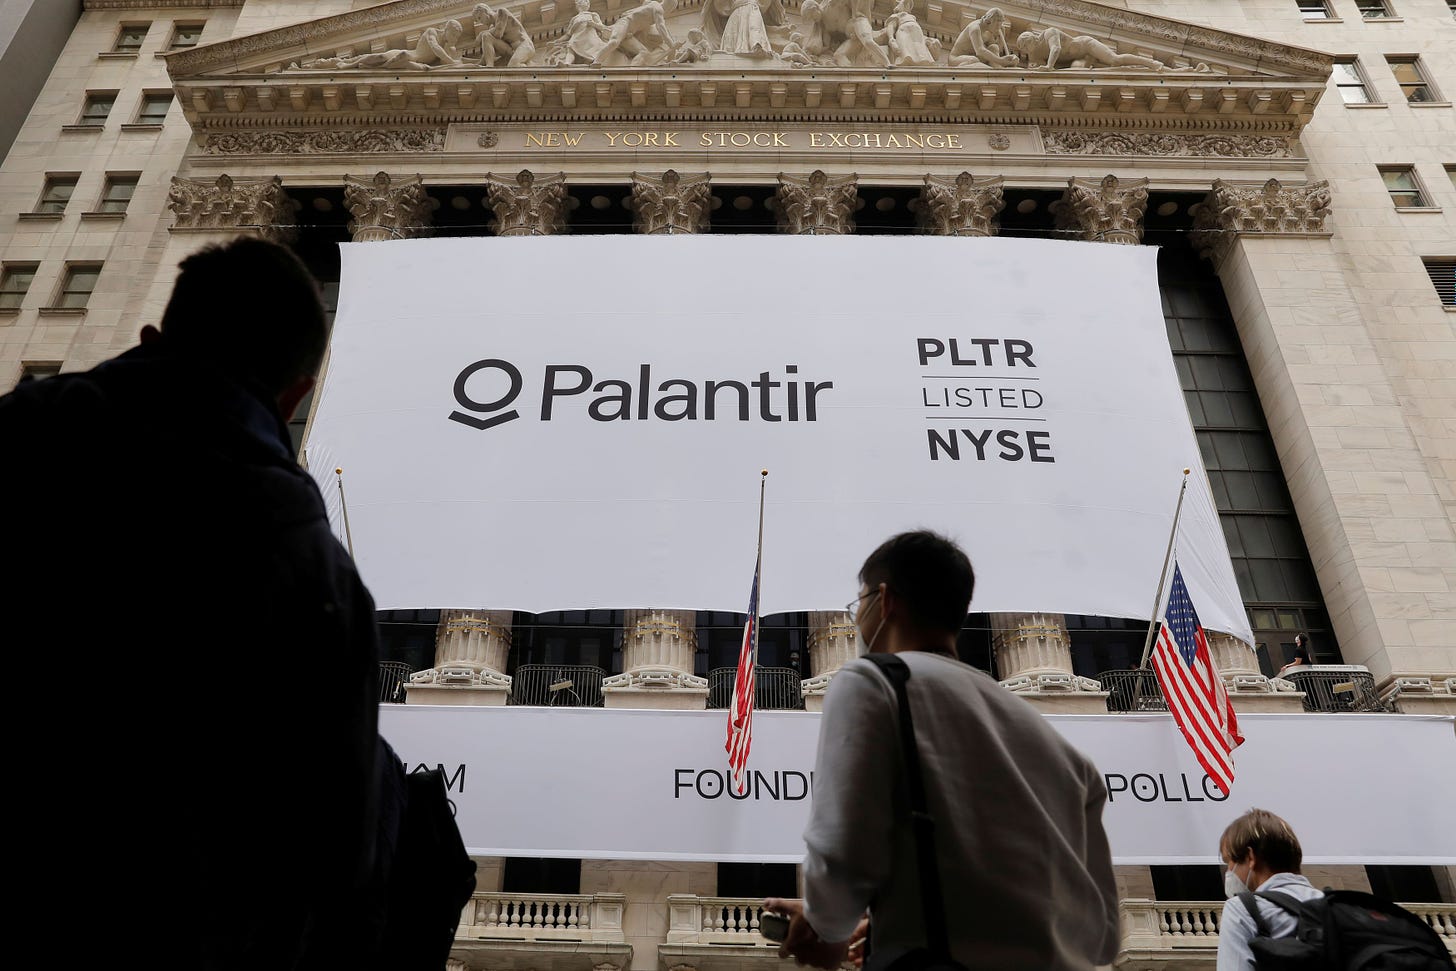 Palantir insiders struggled to sell shares because of software glitch